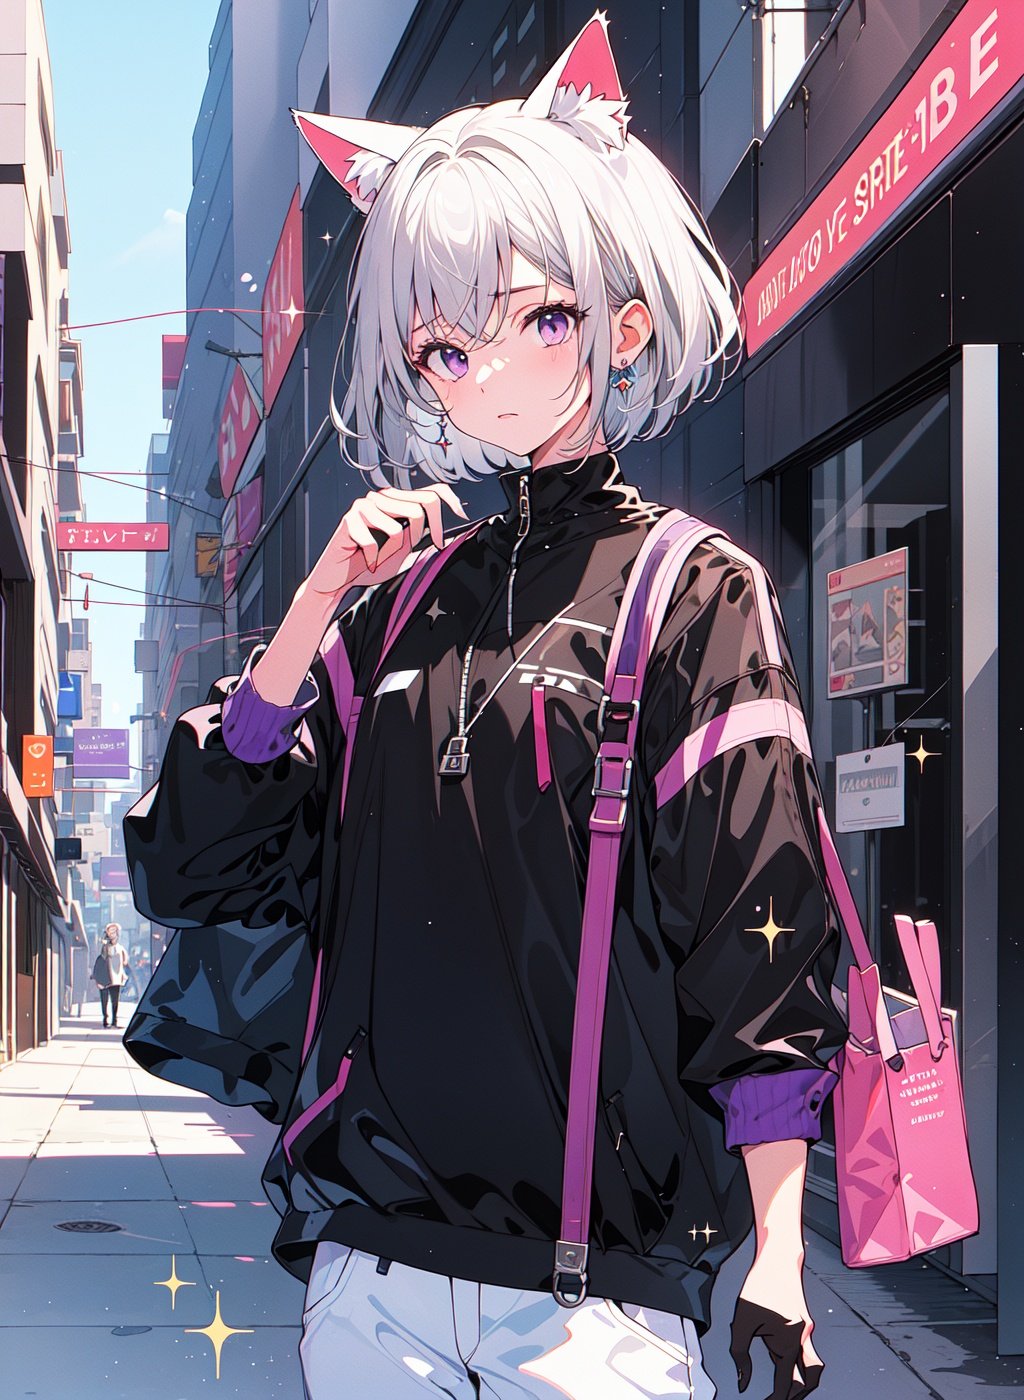 (masterpiece:1.3)), (cat ears, ((short hair)), silver hair, white hair, purple eyes:1.5), 1girl solo ((sparkle:1.3)), eye focus, ((1girl)),Android, ((solo)), cowboy_shot, beautiful detailed eyes, expressive eyes, pretty eyelashes, ((shiny eyes)), (((glossy eyes))), reflective eyes, sparkly eyes, sparkles in eyes, cyborg, artificial arms, artificial legs, ((1990s (style):1.4)), ((vaporwave:1.3)), (purple_theme:1.1), neon_palette, ((neon_lights)), chromatic_aberration, (scan_lines:0.5) ,((commercial street)),(Carrying a transparent small handbag),There are of course those who do not want us to speak We spin the world like a pinball machine We have thoughts of a life in abundance Day and night we wish movies were real And what's behind the screen is our entrance I'm like a satellite Transmitting different eras I am the voice of the next generation Completely digital Create synthetic auras Start a revolution now You will never have to cry 'Cause the future is sold You can never die And you'll never grow old Oh, oh-oh But everything surrounding you is digital Never break the mold You do as you're told Freedom is for sale If you give them control Oh, oh-oh Erase return In the digital world I know it feels like you're part of a dream You can fly and fight wars without judgement You respawn and mistakes will repeal But you will always be searching for an answer I'm like a satellite Transmitting different eras I am the voice of the next generation Completely digital Create synthetic auras Start a revolution now You will never have to cry 'Cause the future is sold You can never die And you'll never grow old Oh, oh-oh But everything surrounding you is digital Never break the mold You do as you're told Freedom is for sale If you give them control Oh, oh-oh Erase return In the digital world Start a revolution now Start a revolution now (Now, now, now, now, now) (We have thoughts of a life in abundance) (Day and night we wish movies were real) (And what's behind the screen is our entrance) You will never have to cry 'Cause the future is sold You can never die And you'll never grow old Oh, oh-oh But everything surrounding you is digital Never break the mold You do as you're told Freedom is for sale If you give them control Oh, oh-oh Erase return In the digital world, fcportrait